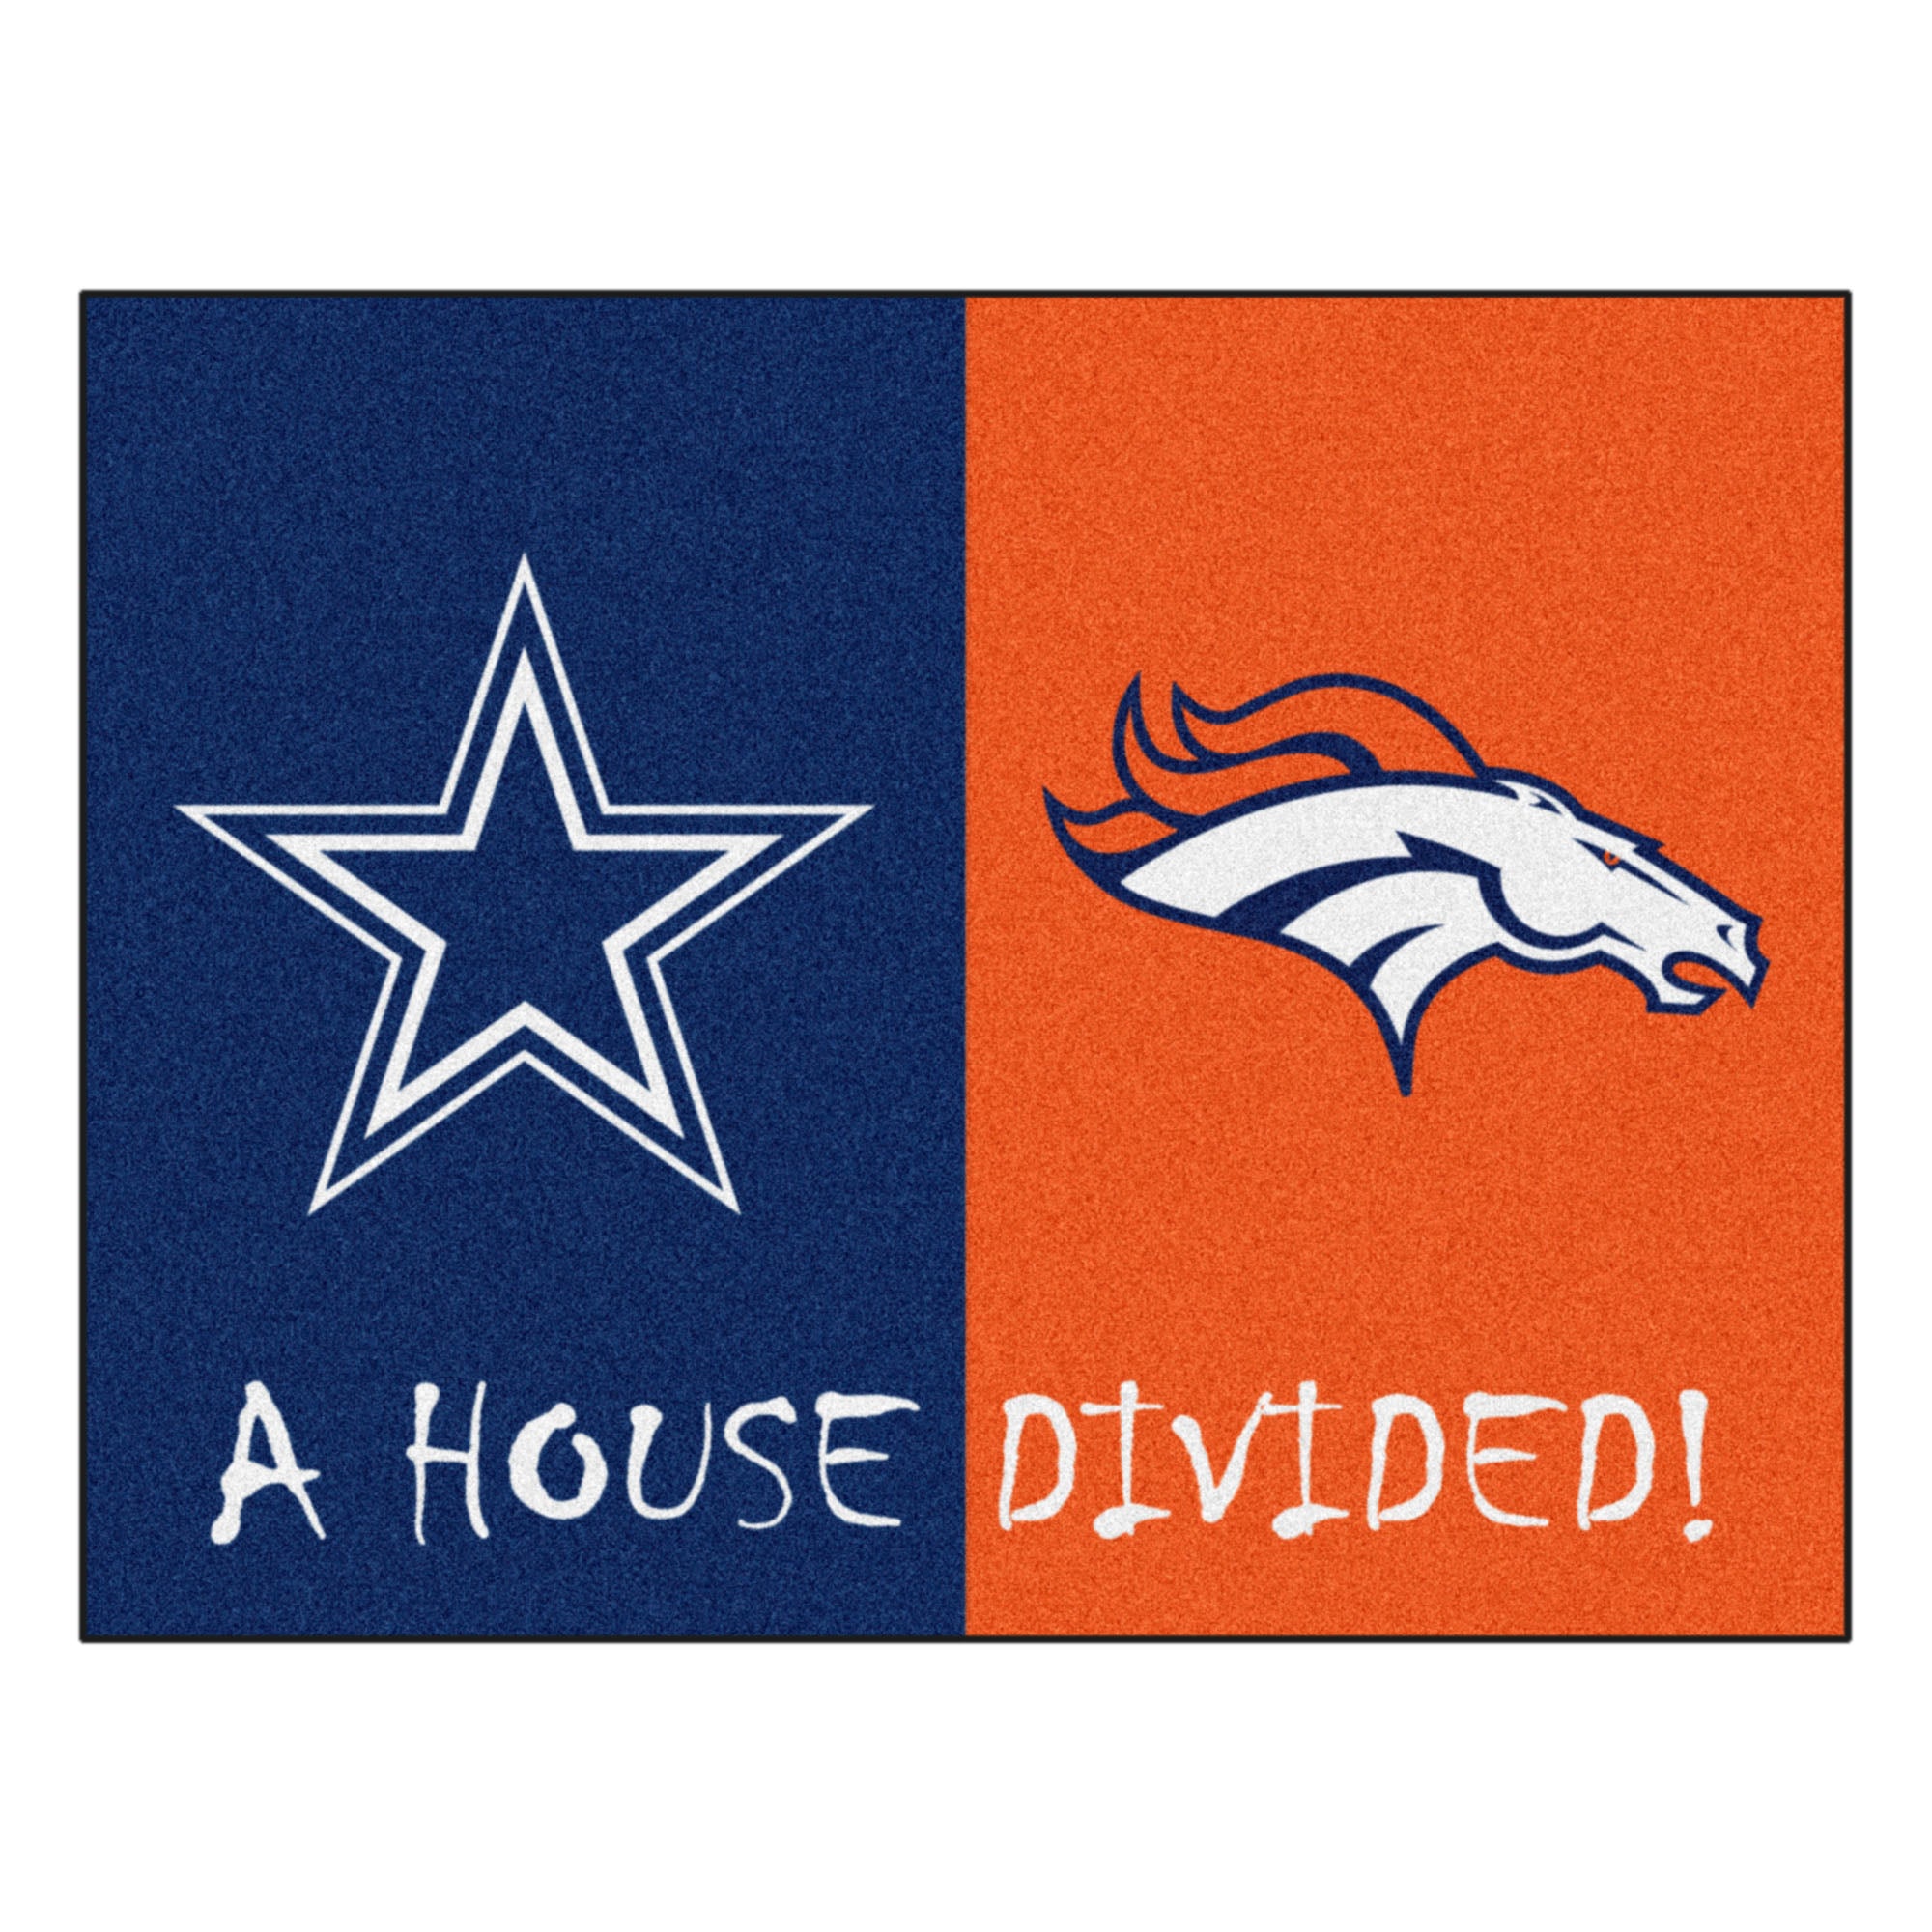 NFL House Divided - Cowboys / Broncos House Divided Mat